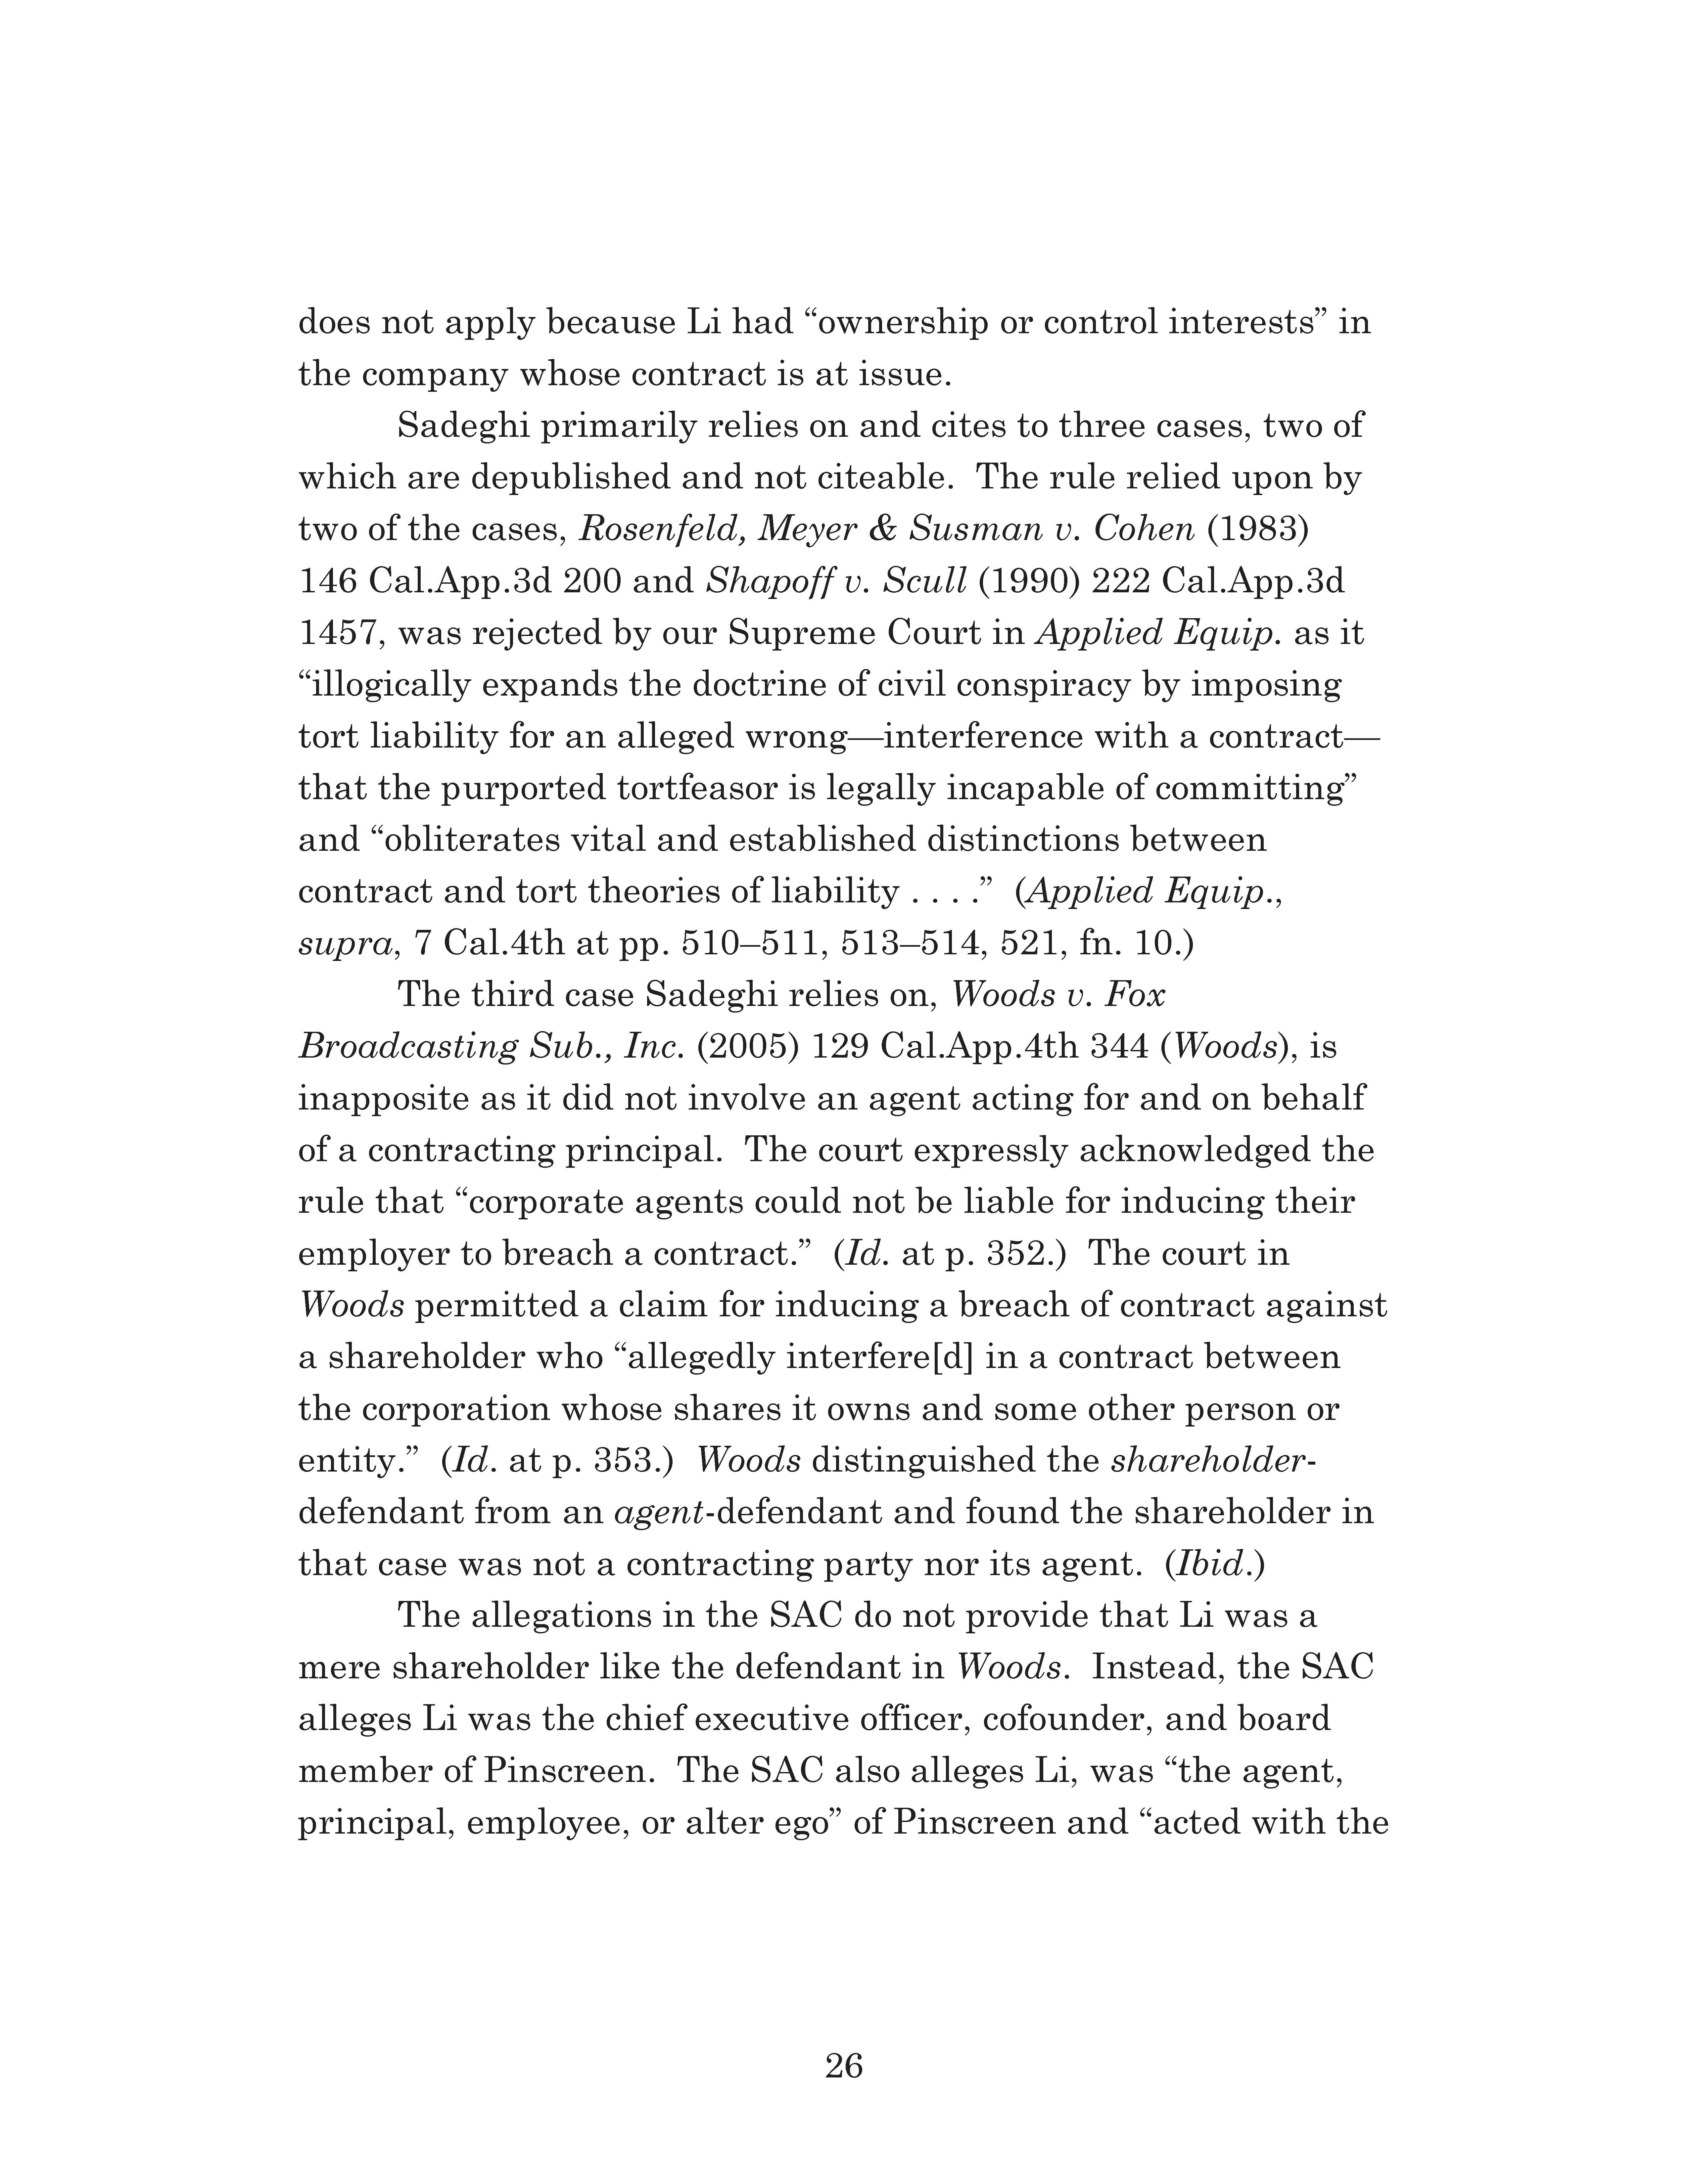 Appellate Court's Opinion Upholding Sadeghi's Claims for Fraud, Battery and IIED Against Li Page 26